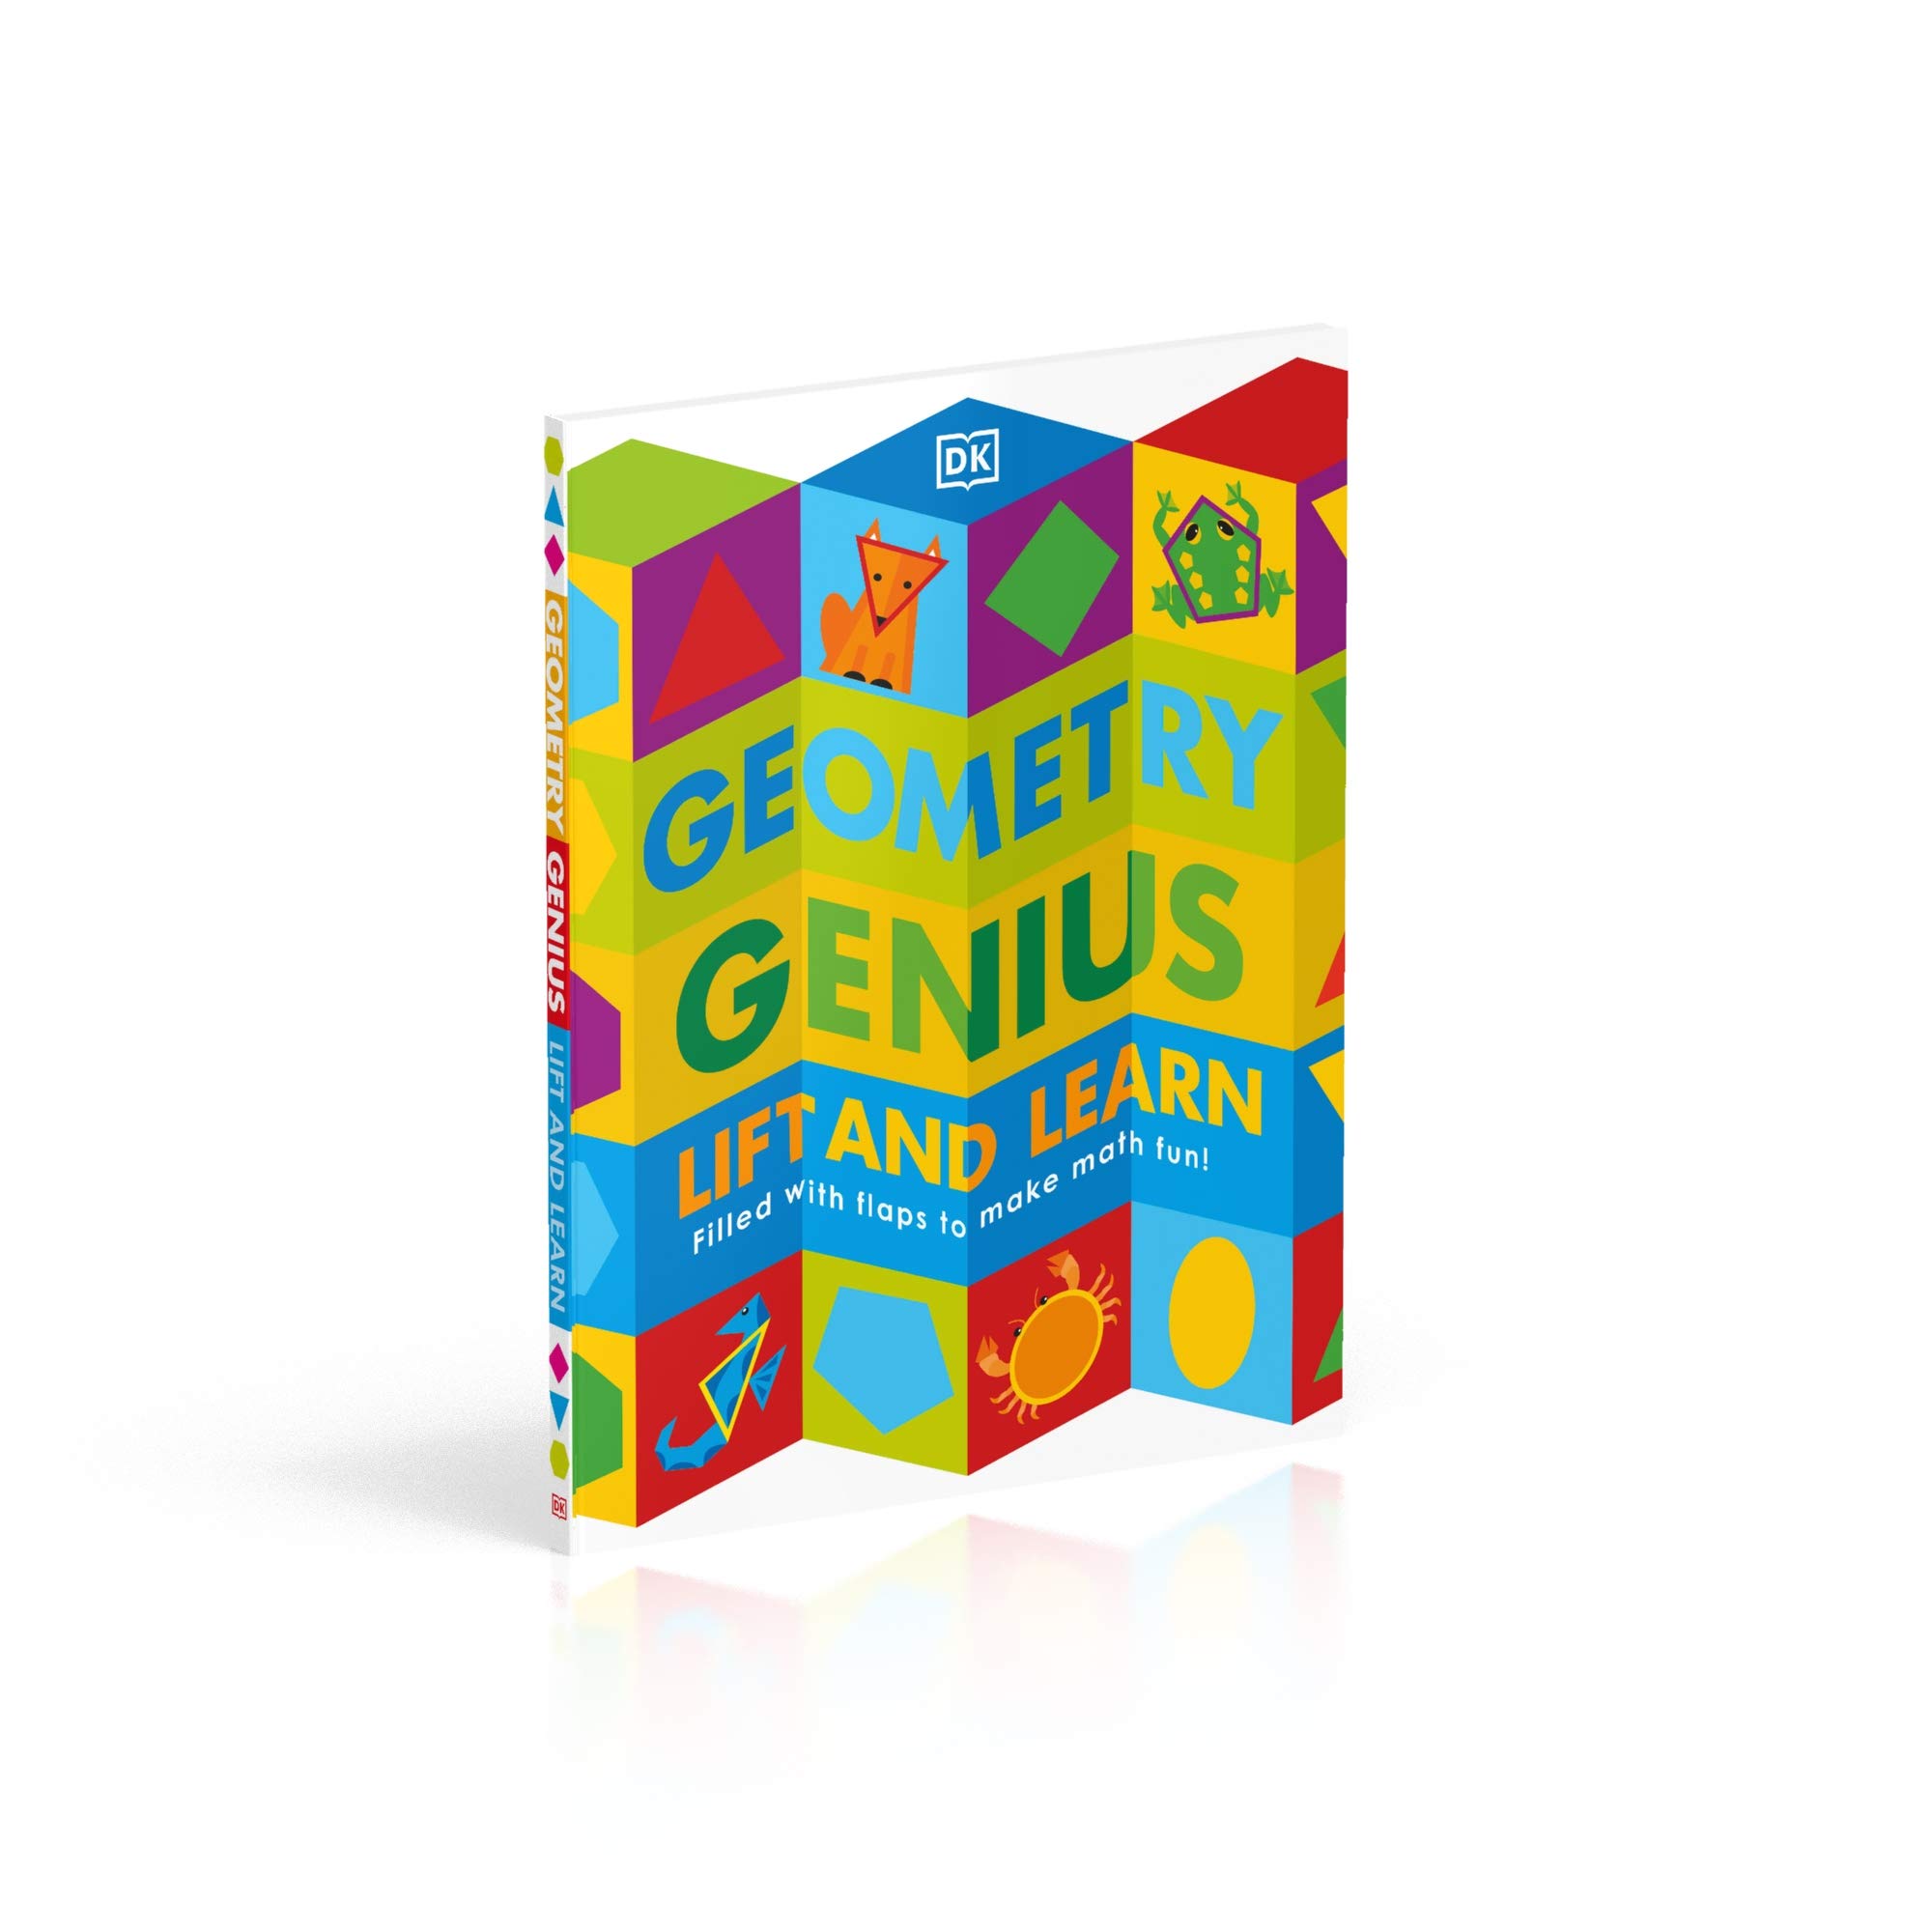 Geometry Genius: Lift And Learn: Filled With Flaps To Make Math Fun!